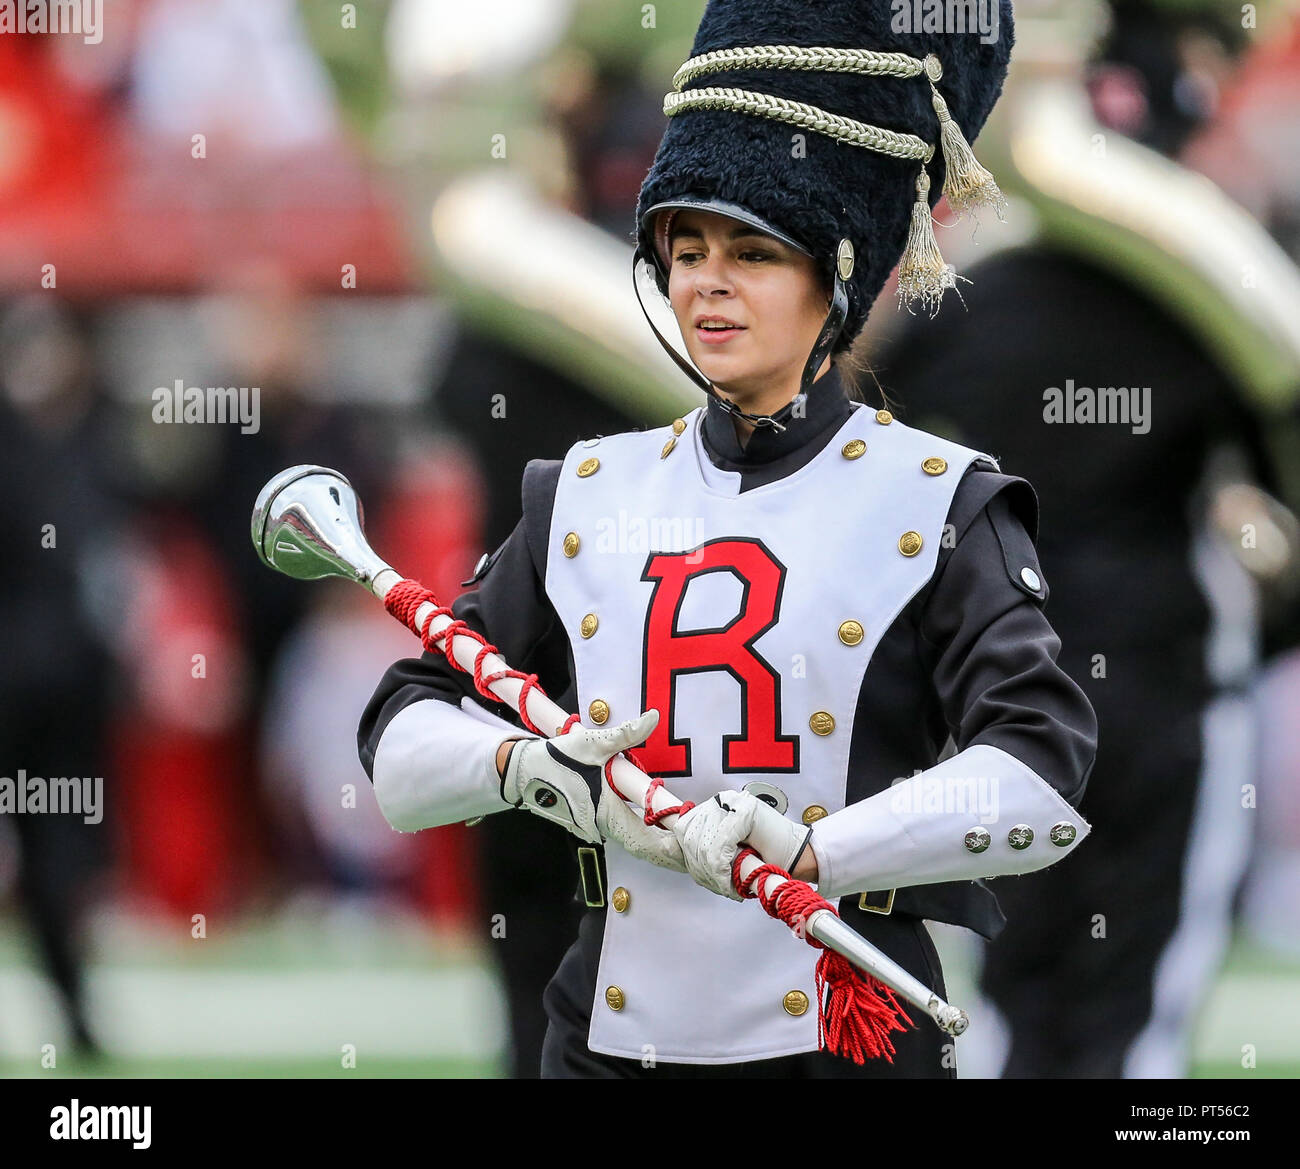 Piscataway, NJ, USA. 6th Oct, 2018. The Marching Scarlet Knights get ready for the NCAA football game between the Illinois Fighting Illini and the Rutgers Scarlet Knights at HighPoint Solutions Stadium in Piscataway, NJ. Mike Langish/Cal Sport Media. Credit: csm/Alamy Live News Stock Photo